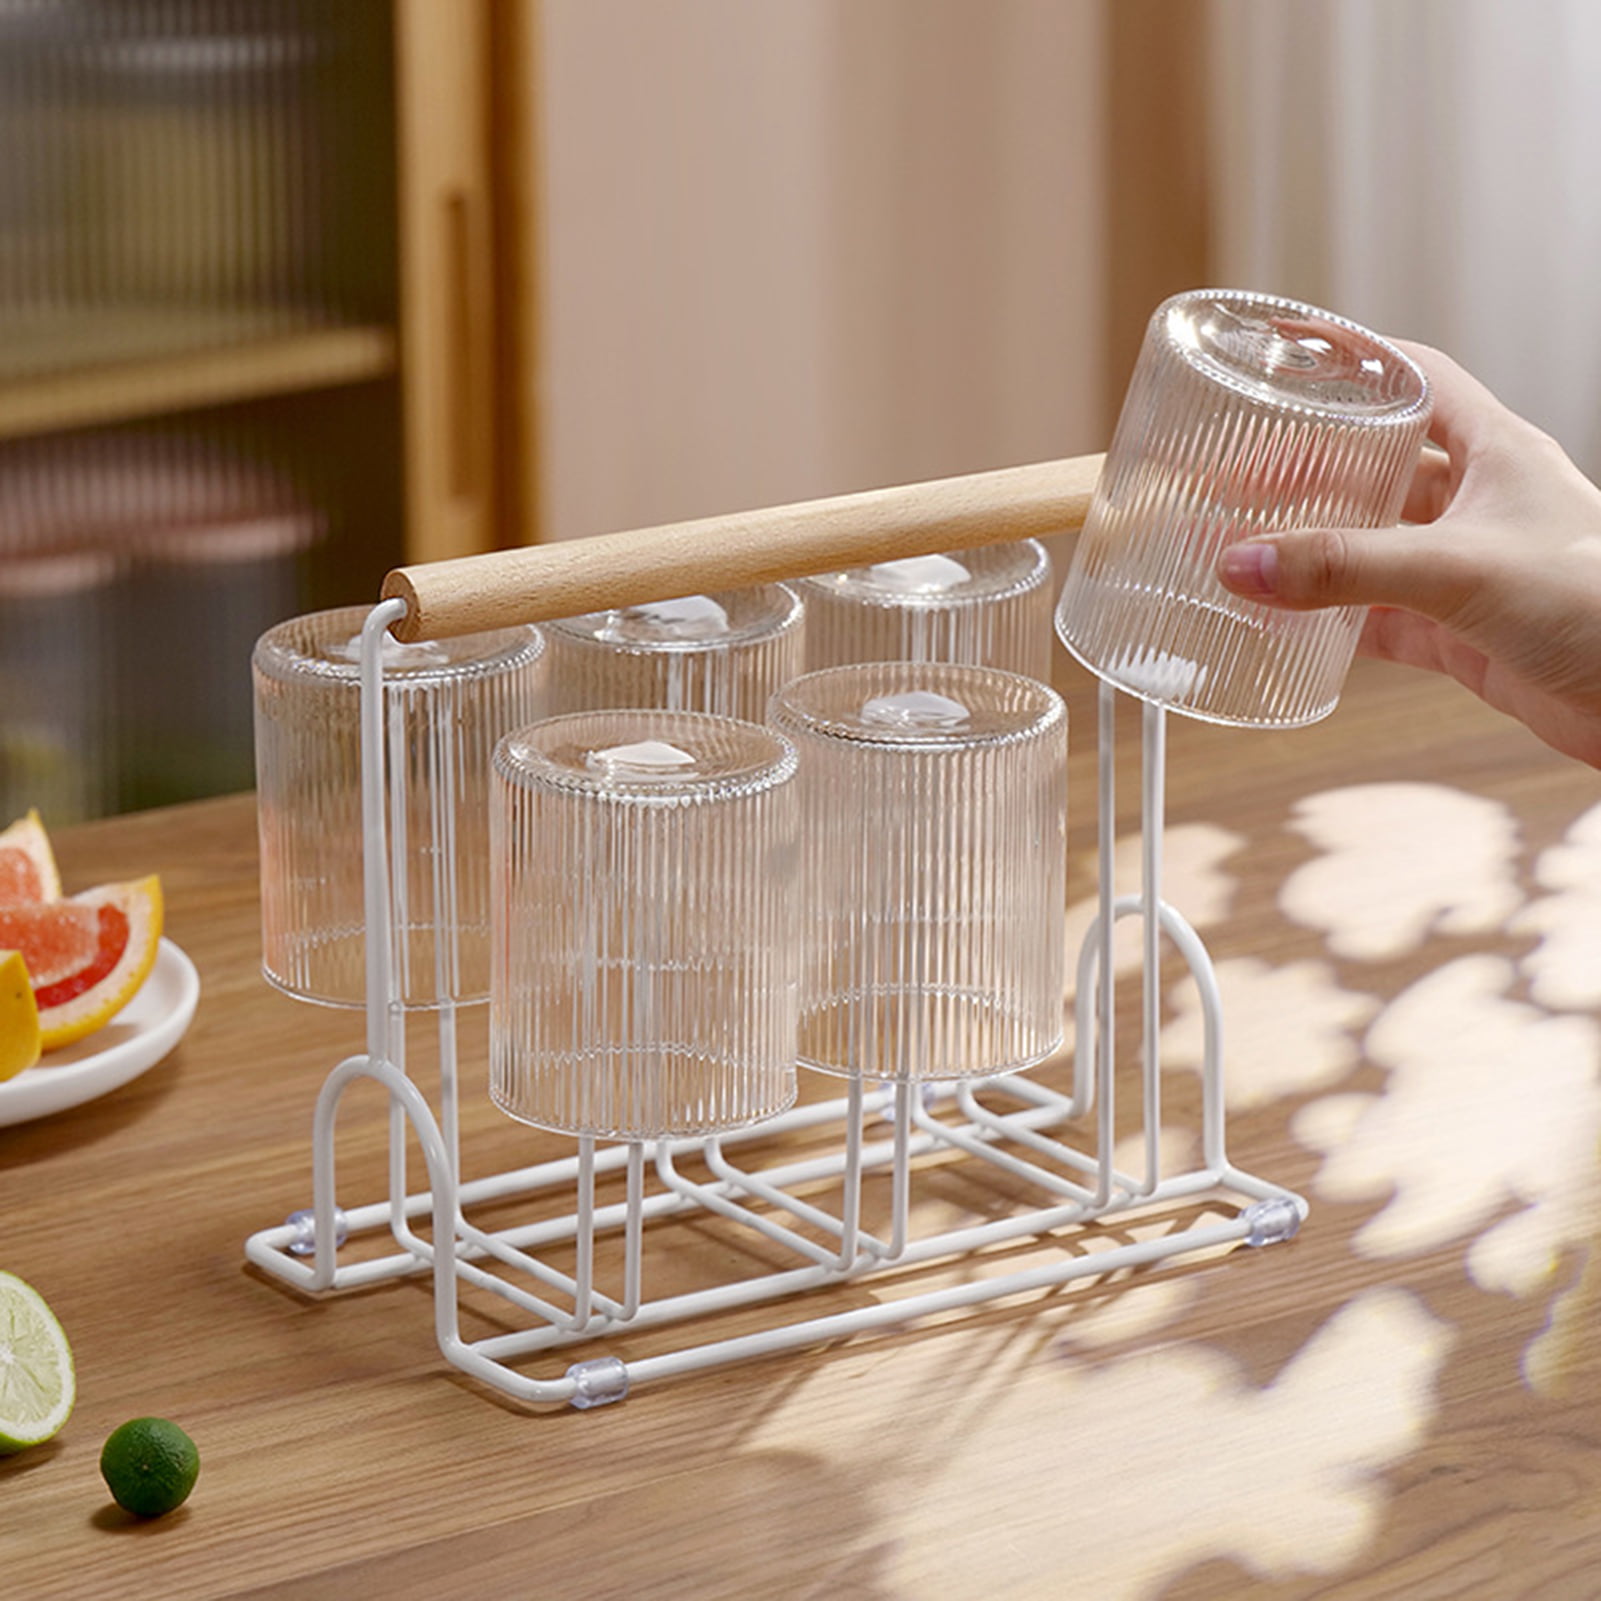 Warkul Dust-proof Cup Drying Rack Multifunctional Plastic Draining Glass Cup Holder Stand Home Decoration, Size: Large, White